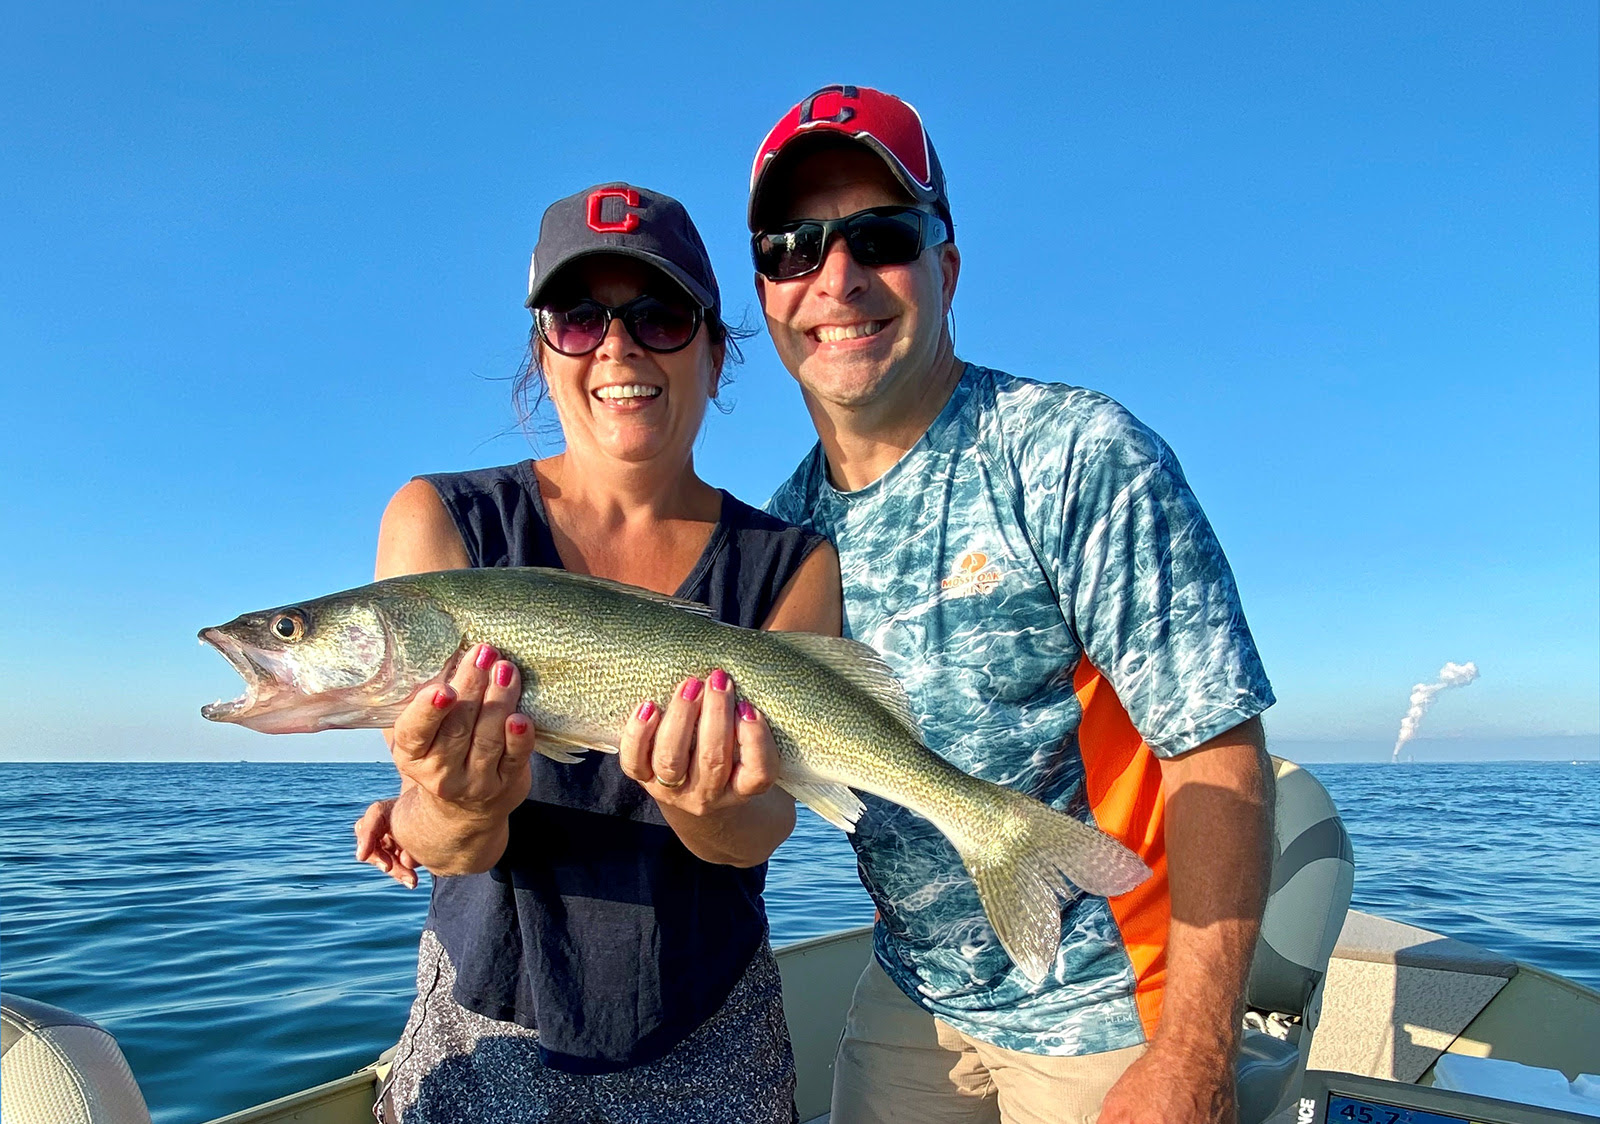 Expectations High for Another Great Year of Lake Erie Walleye